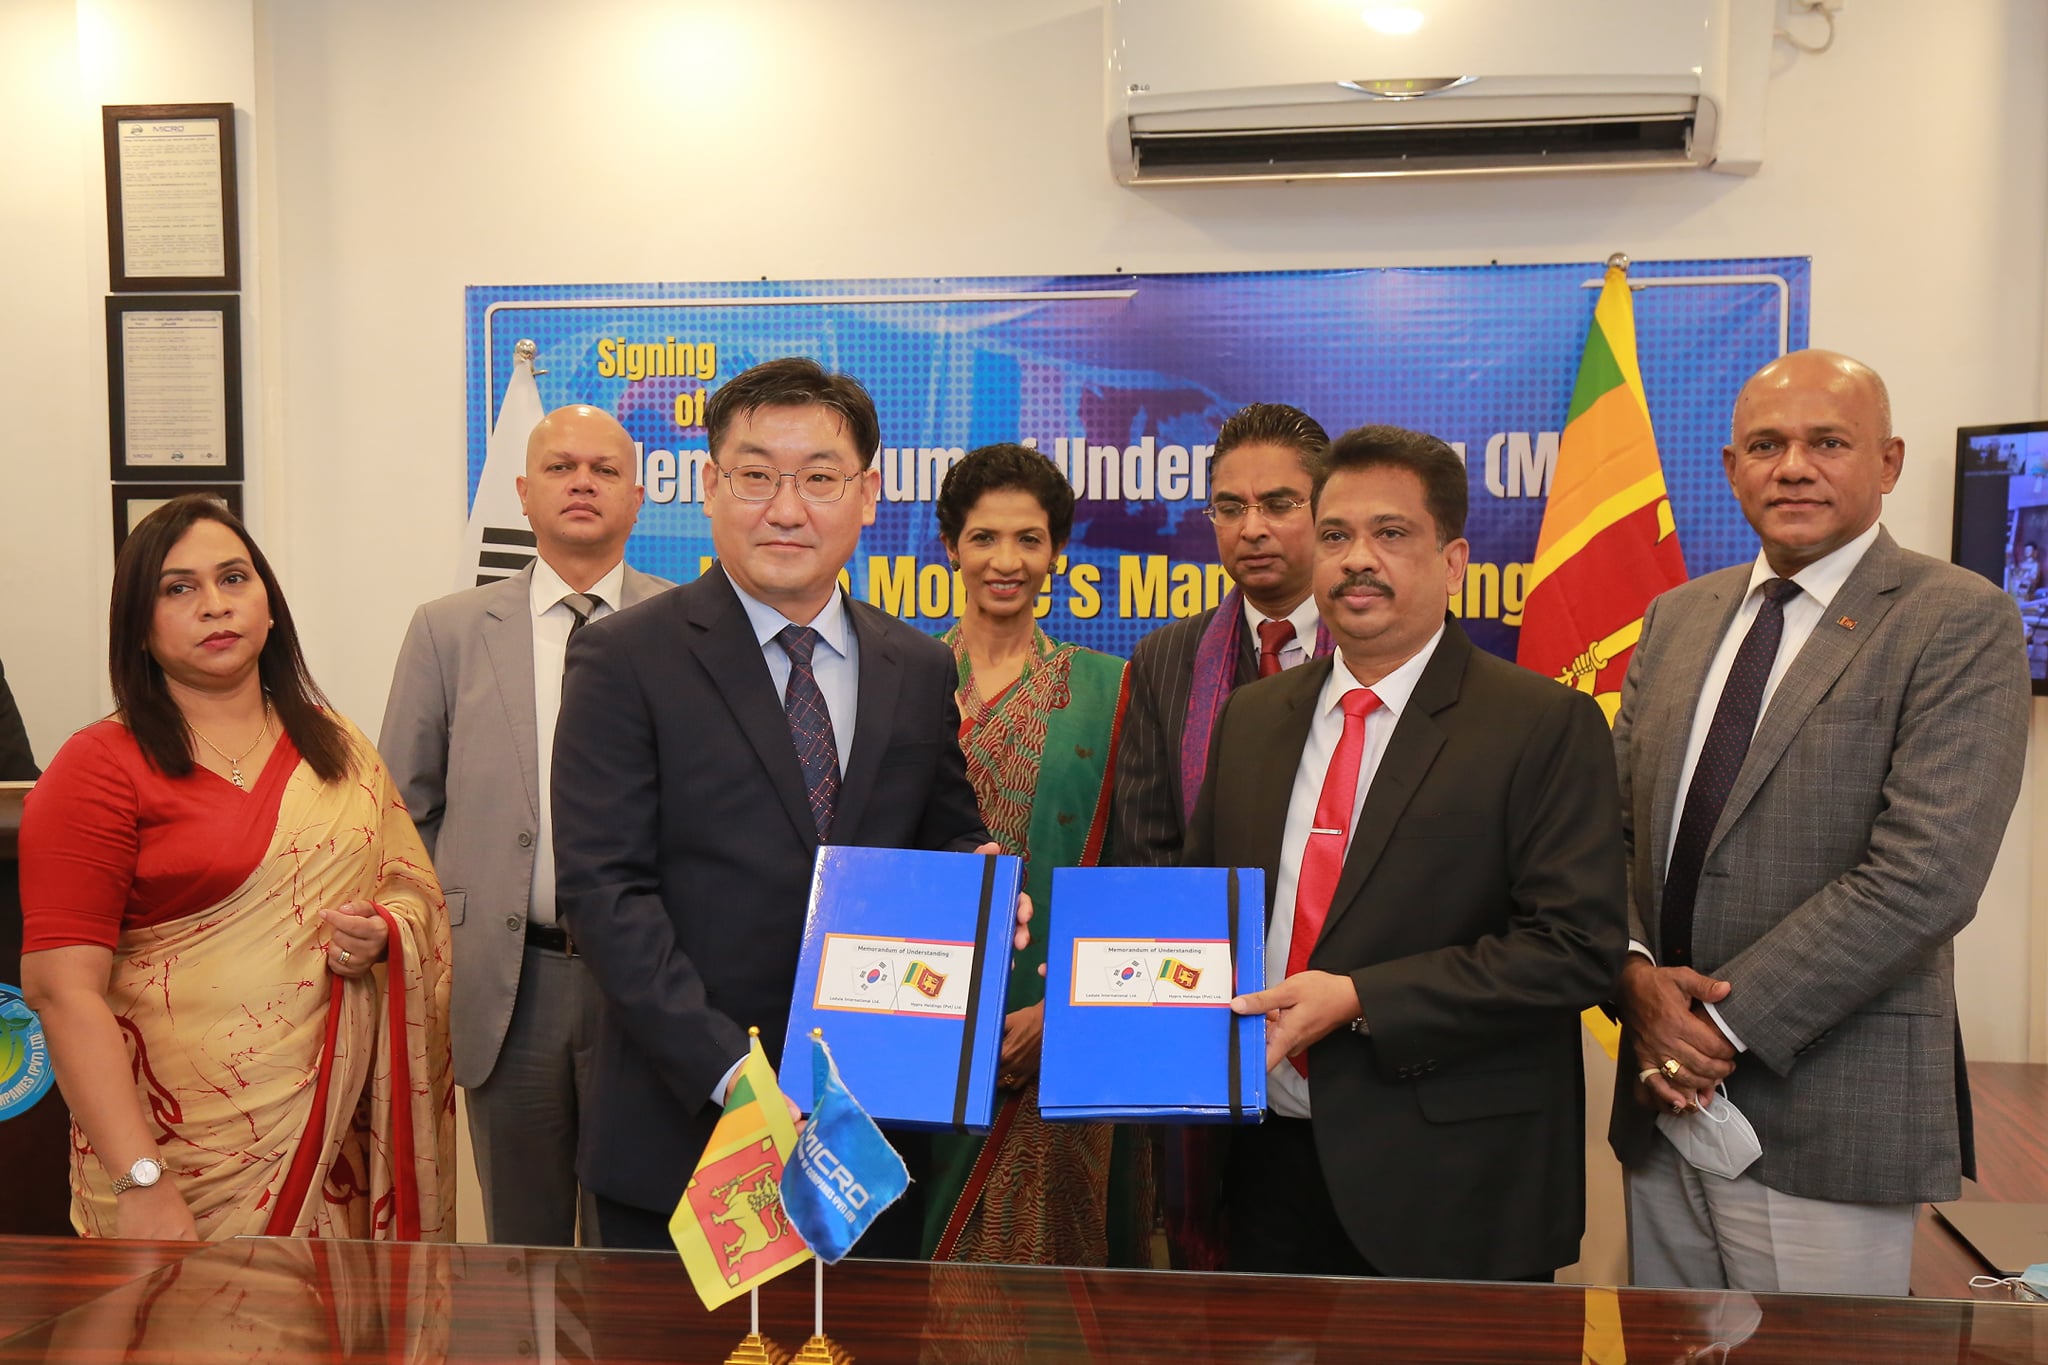 MoU signed for Sri Lanka’s first ever smart phone manufacturing plant